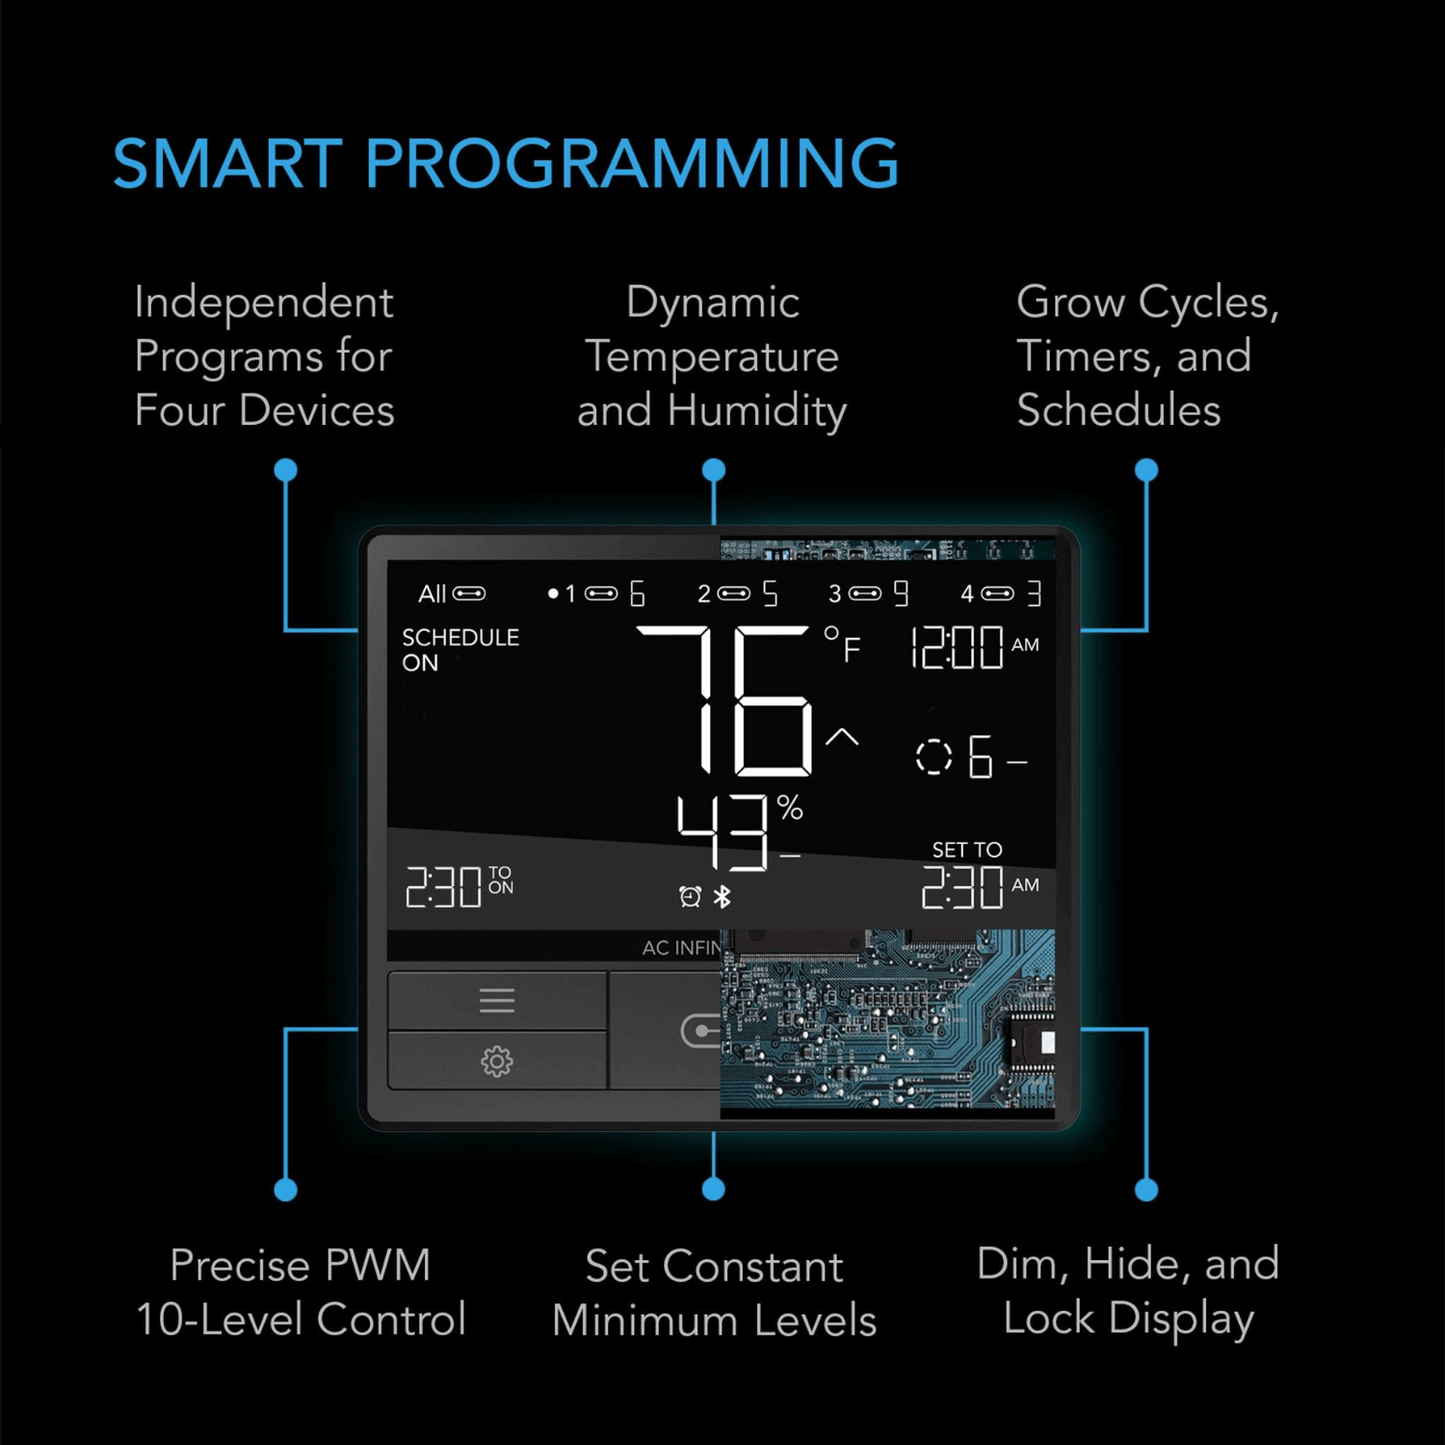 AC Infinity CONTROLLER 69, Independent Programs for Four Devices, Dynamic Temperature, Humidity, Scheduling, Cycles, Levels Control, Data App CTR69A Accessories